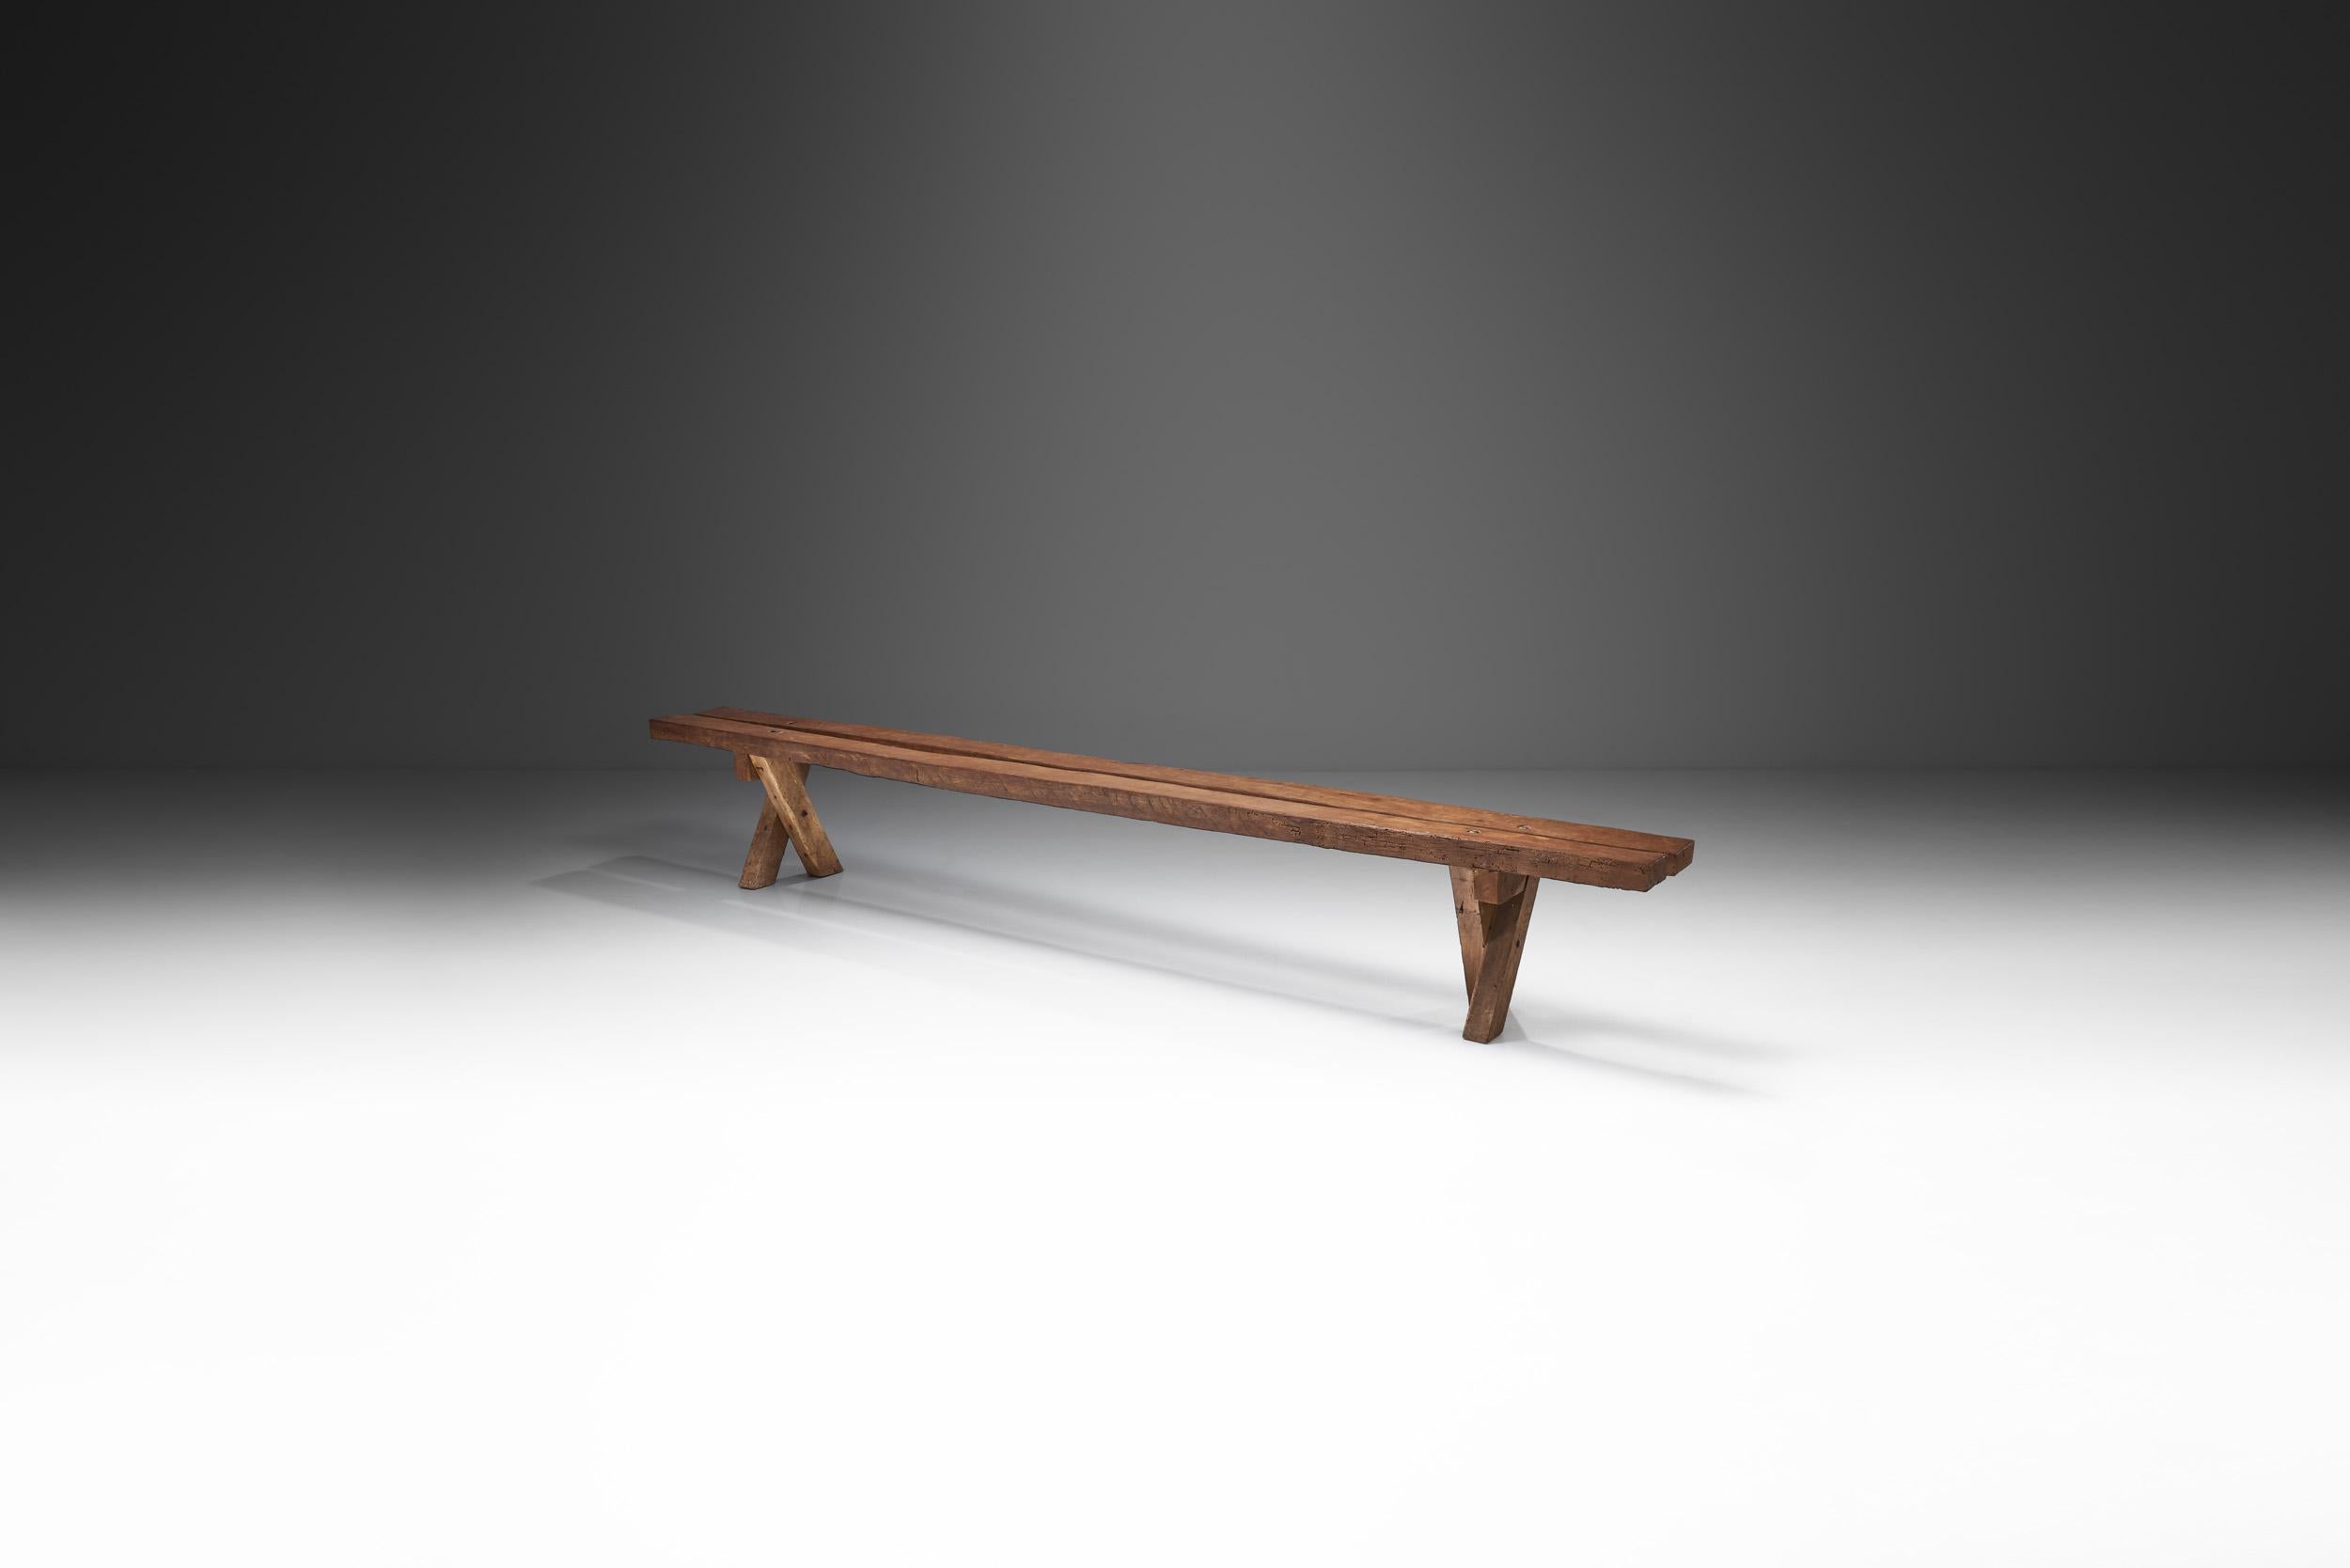 Like the bench with backrests, this simple bench was created by Jean and Sébastien Touret for a religious community of Loir et Cher -a department in the Centre-Val de Loire region of France - from oak of the property. This also means that these